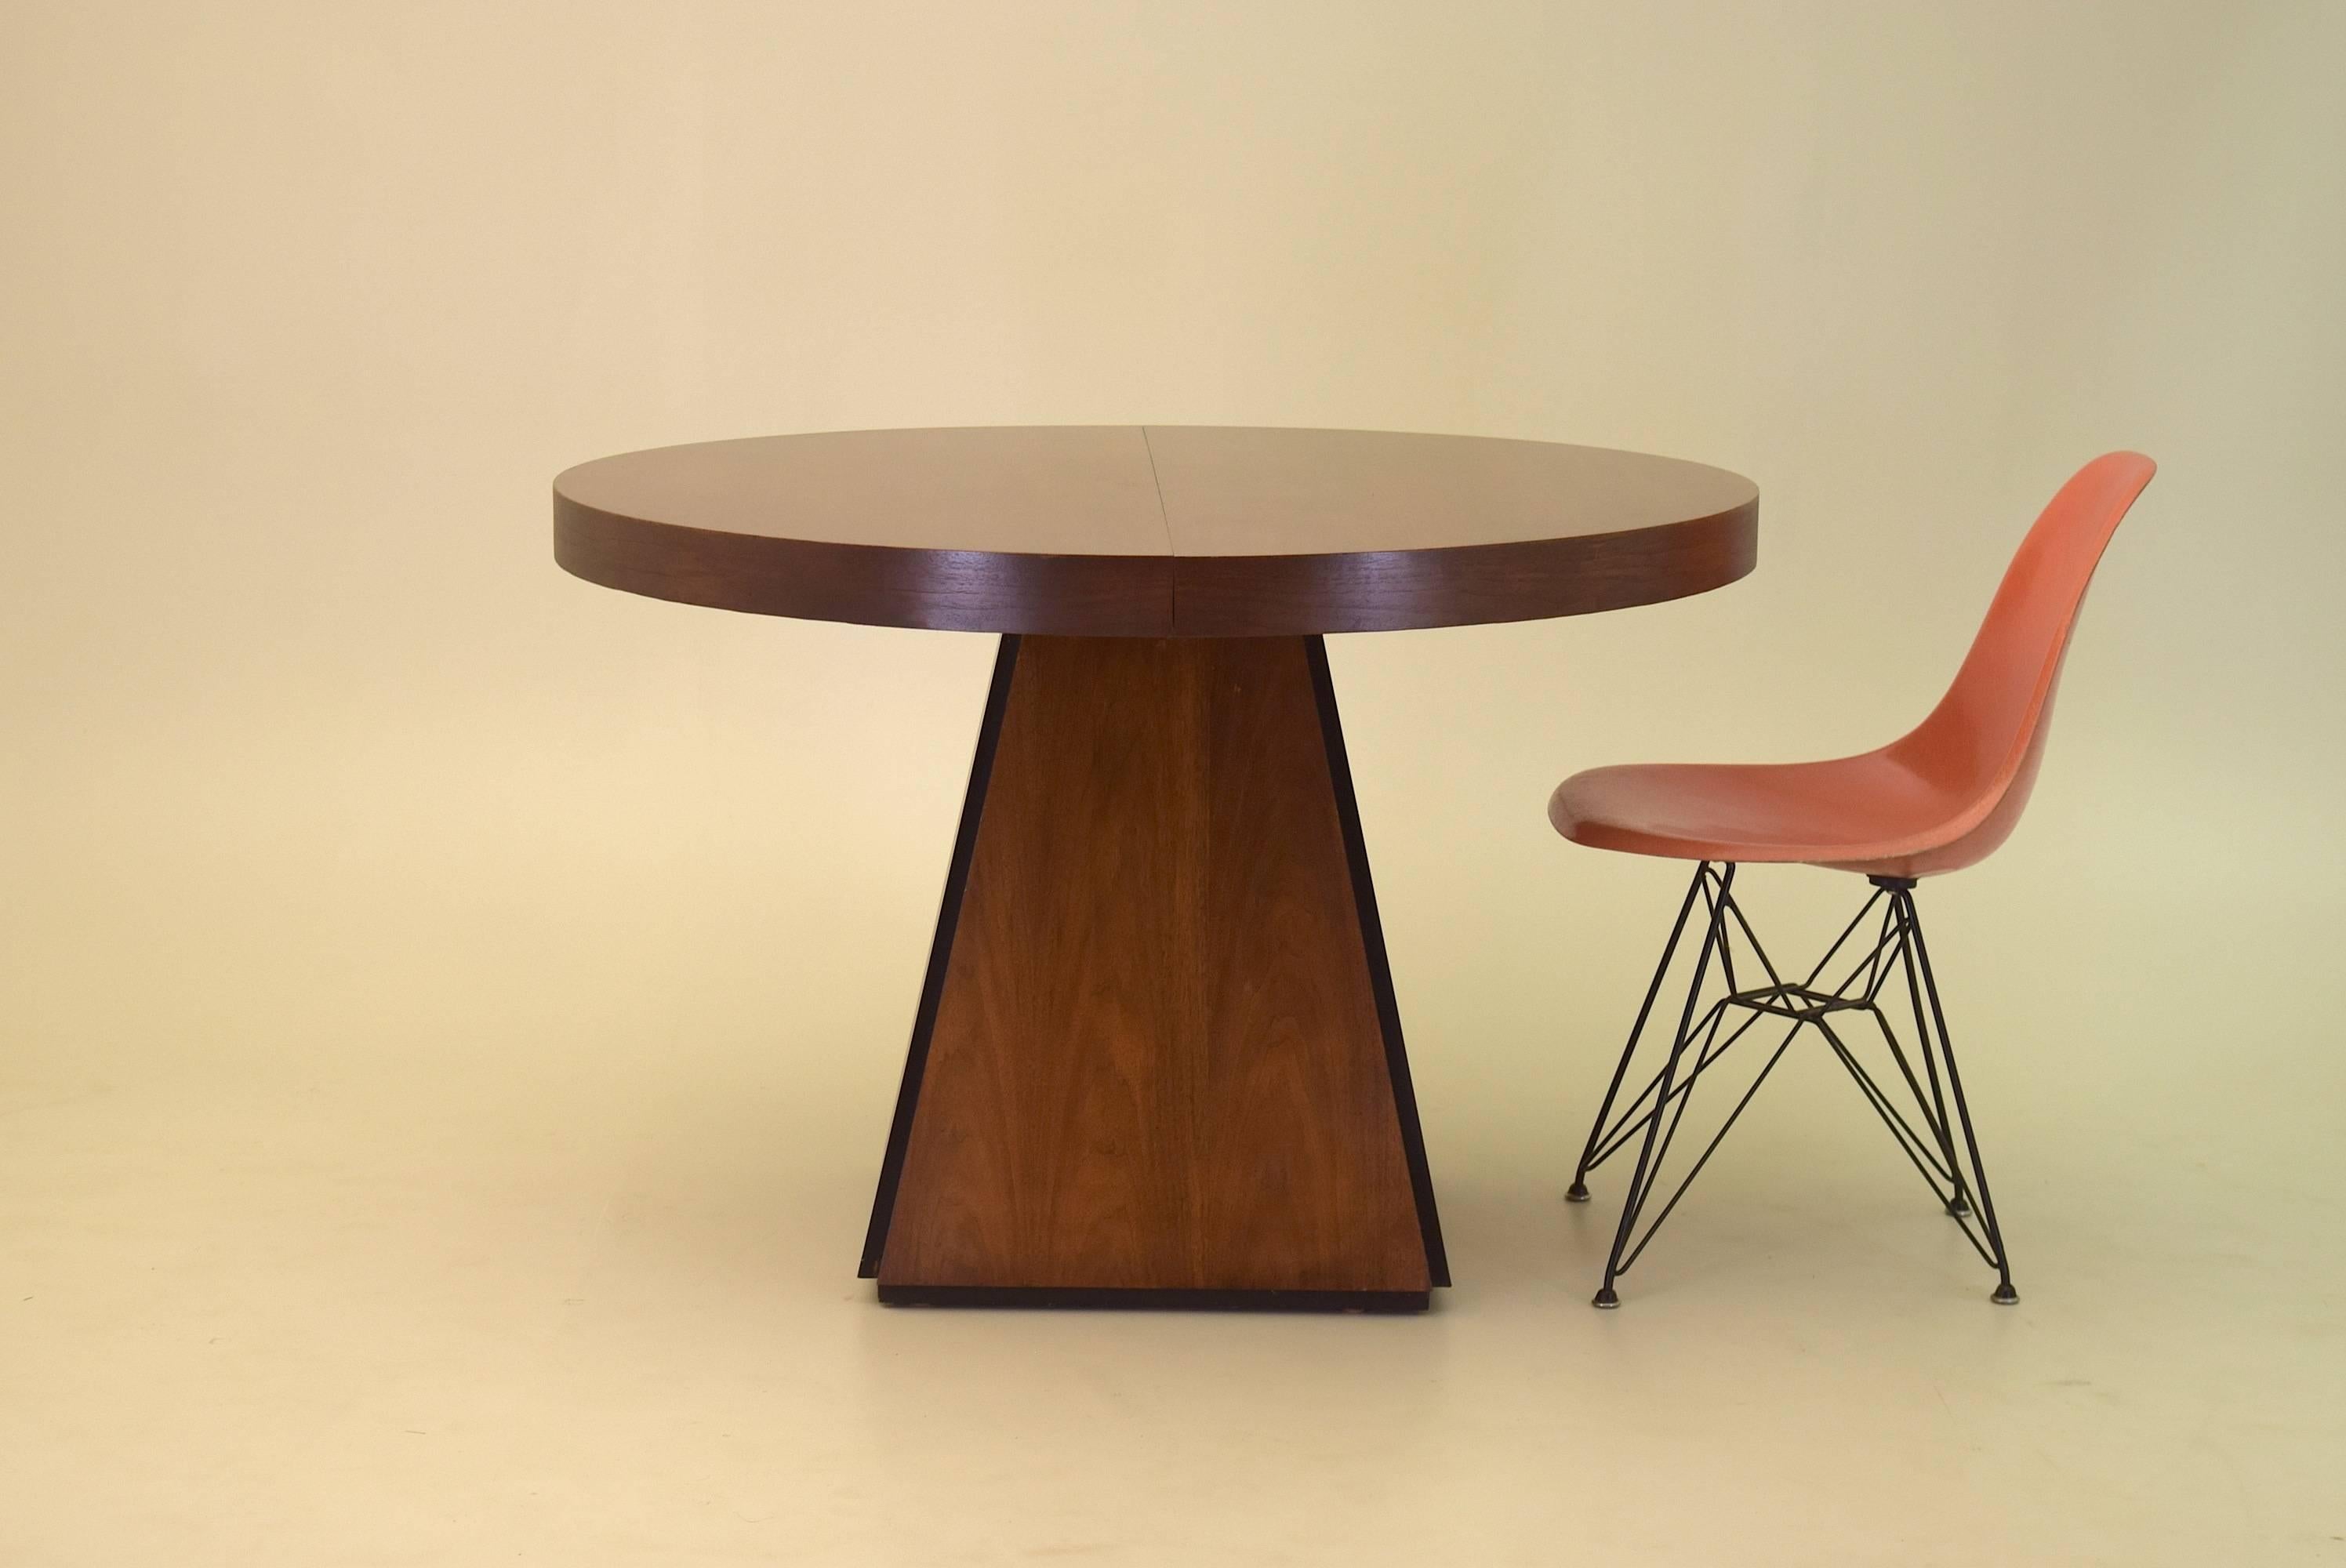 Mid-Century Modern Pierre Cardin Round Obelisk Dining Table in Walnut with Extension Leaf